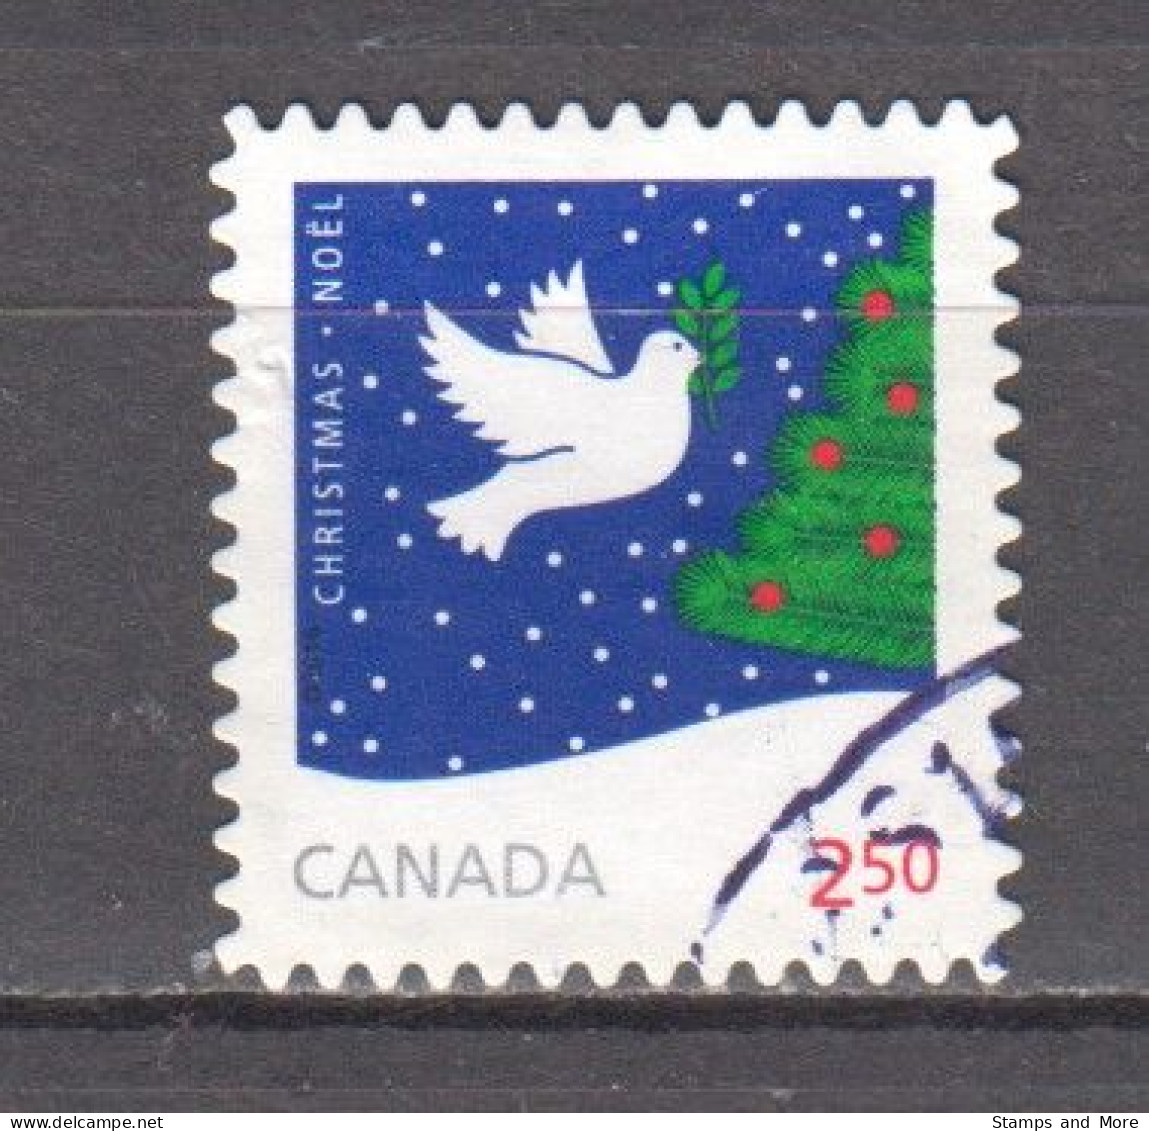 Canada 2016 Mi 3437 Canceled - Used Stamps